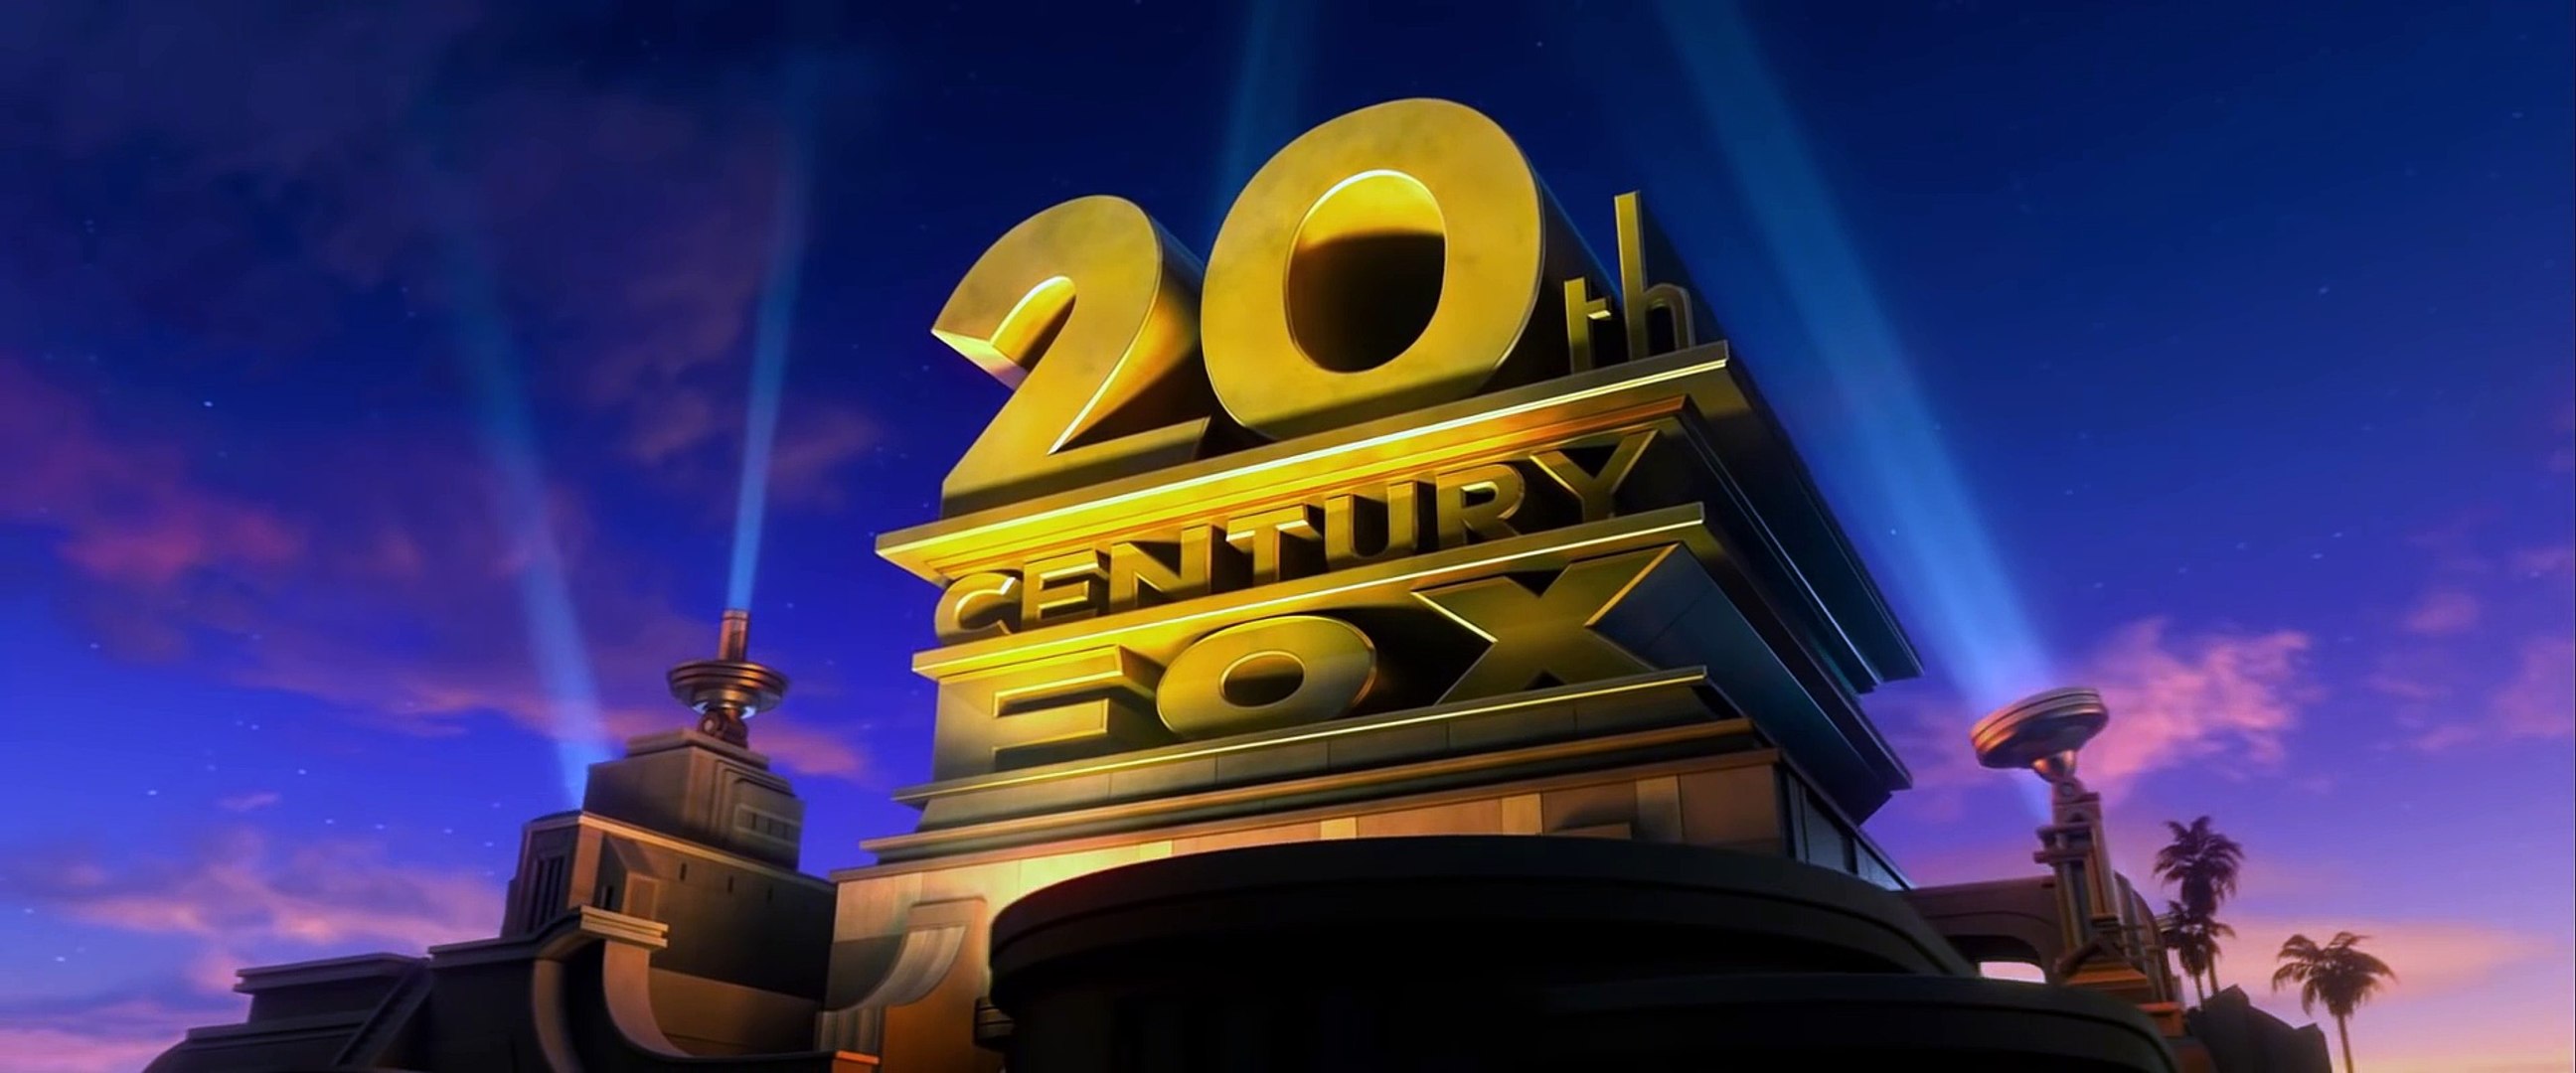 20th-century-fox-template-blender-free-download-printable-templates